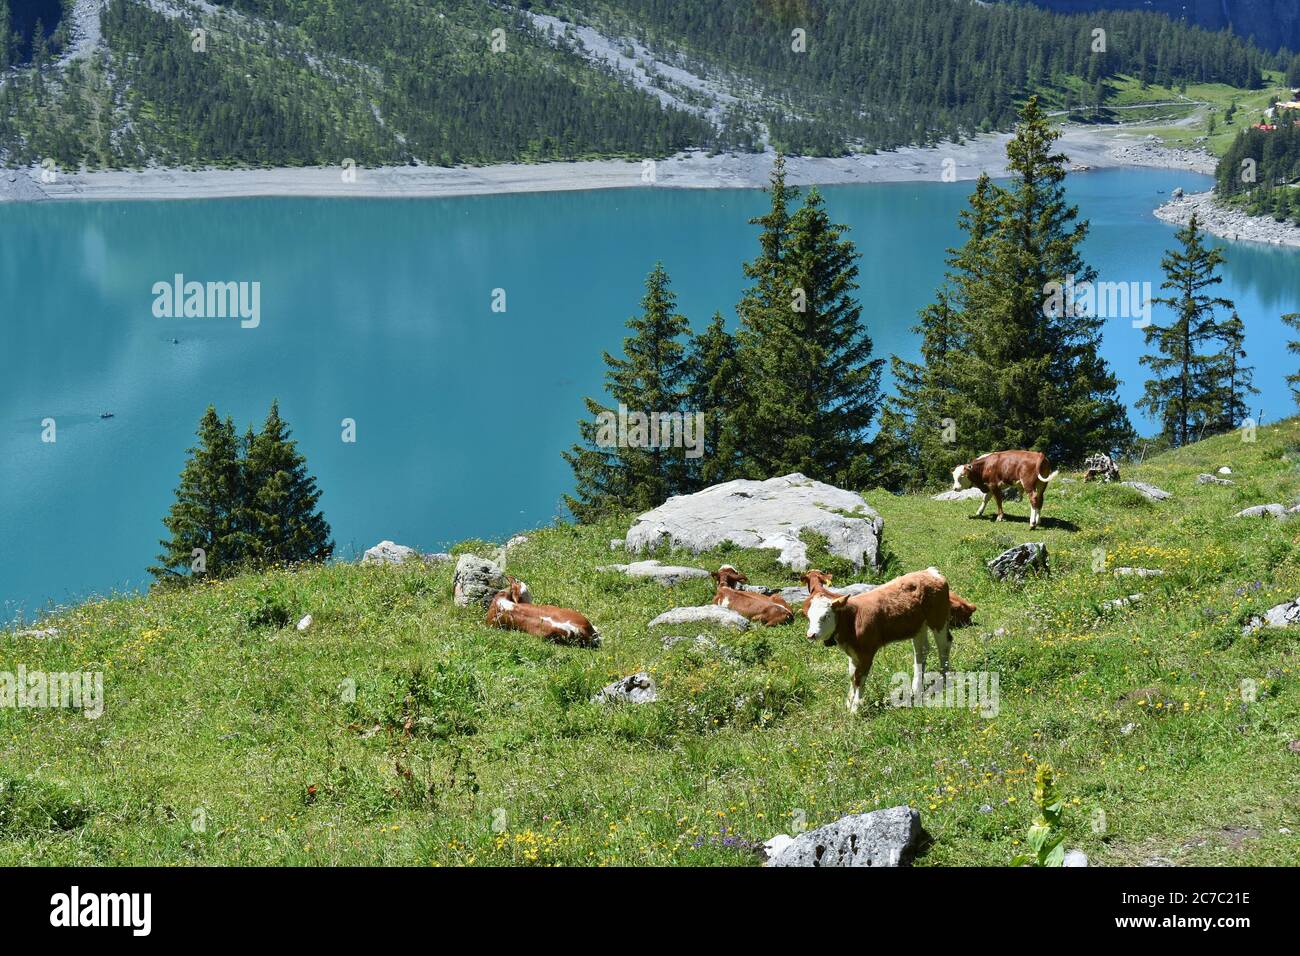 Cows on a meadow in the Swiss Alps with the Oeschinen Lake (Oeschinensee) visible in the background Stock Photo